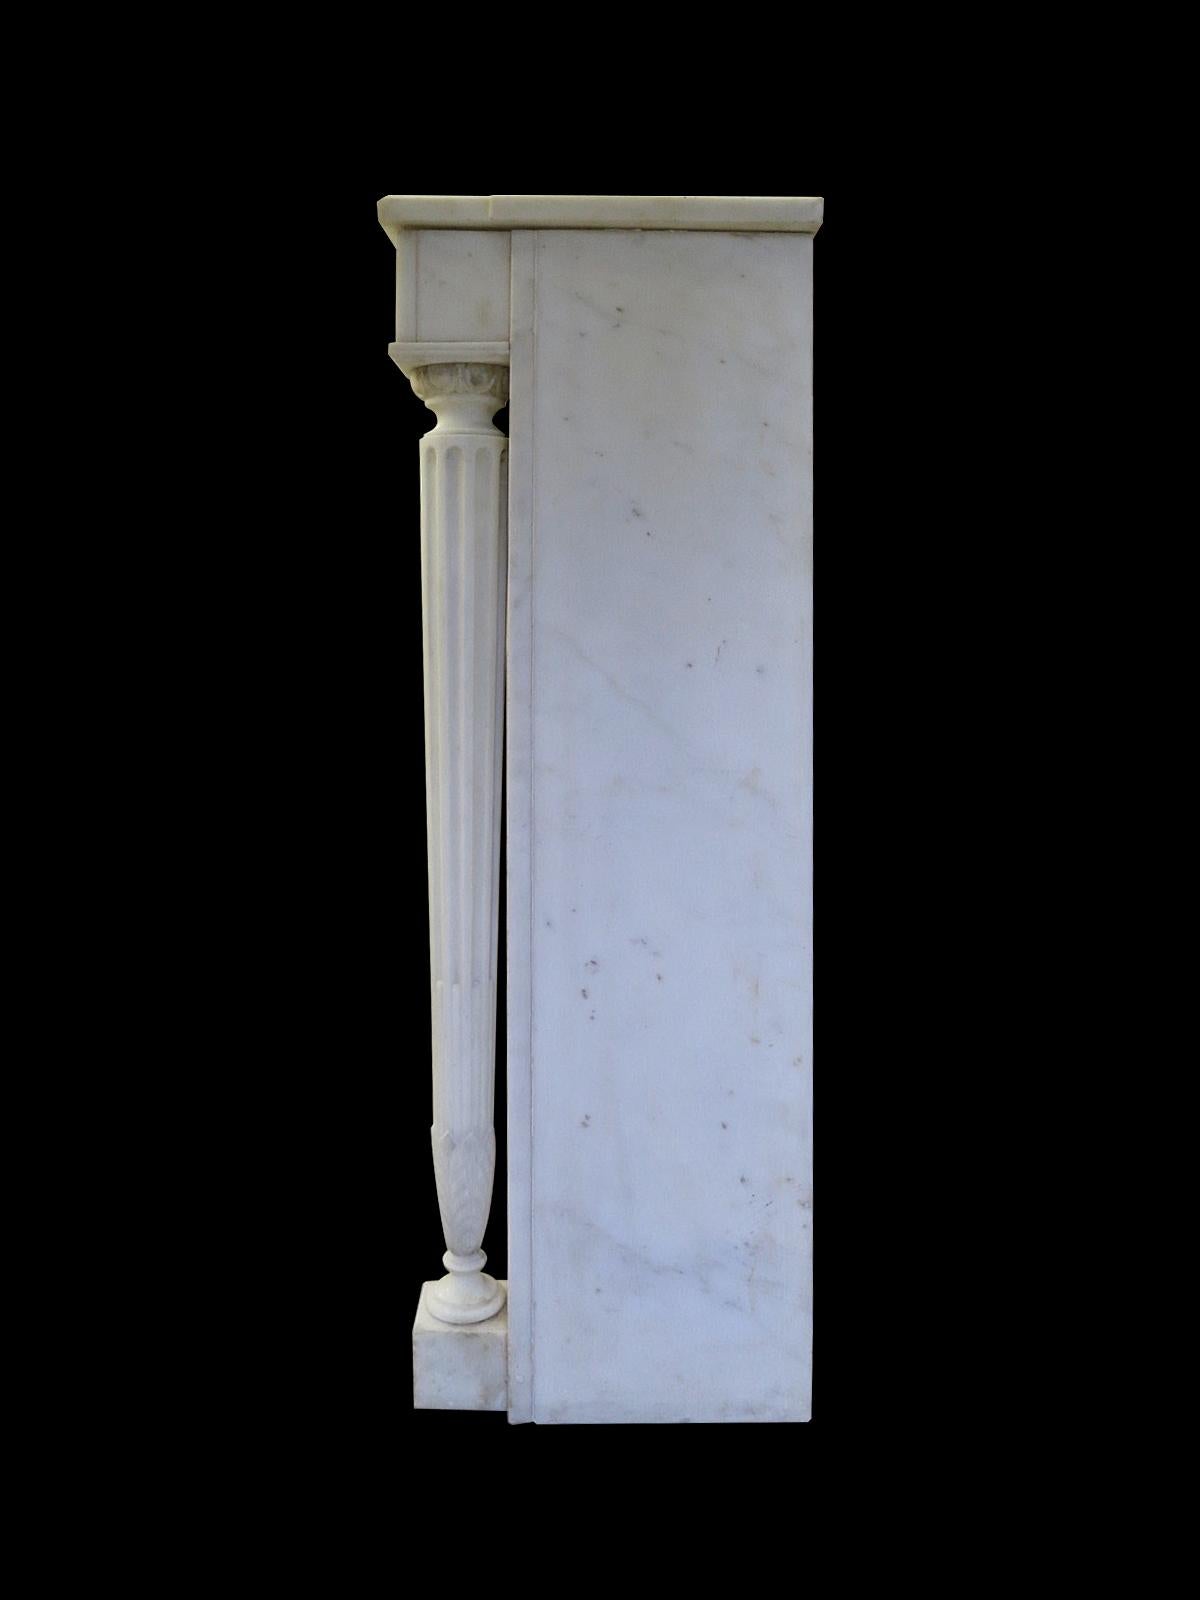 A late 19th century Louis XVI style fireplace in white marble, with delicately tapering and fluted fully disengaged columns terminating in Acanthus leaf, and capped with egg and dart. The columns supporting a fielded paneled frieze, with carved